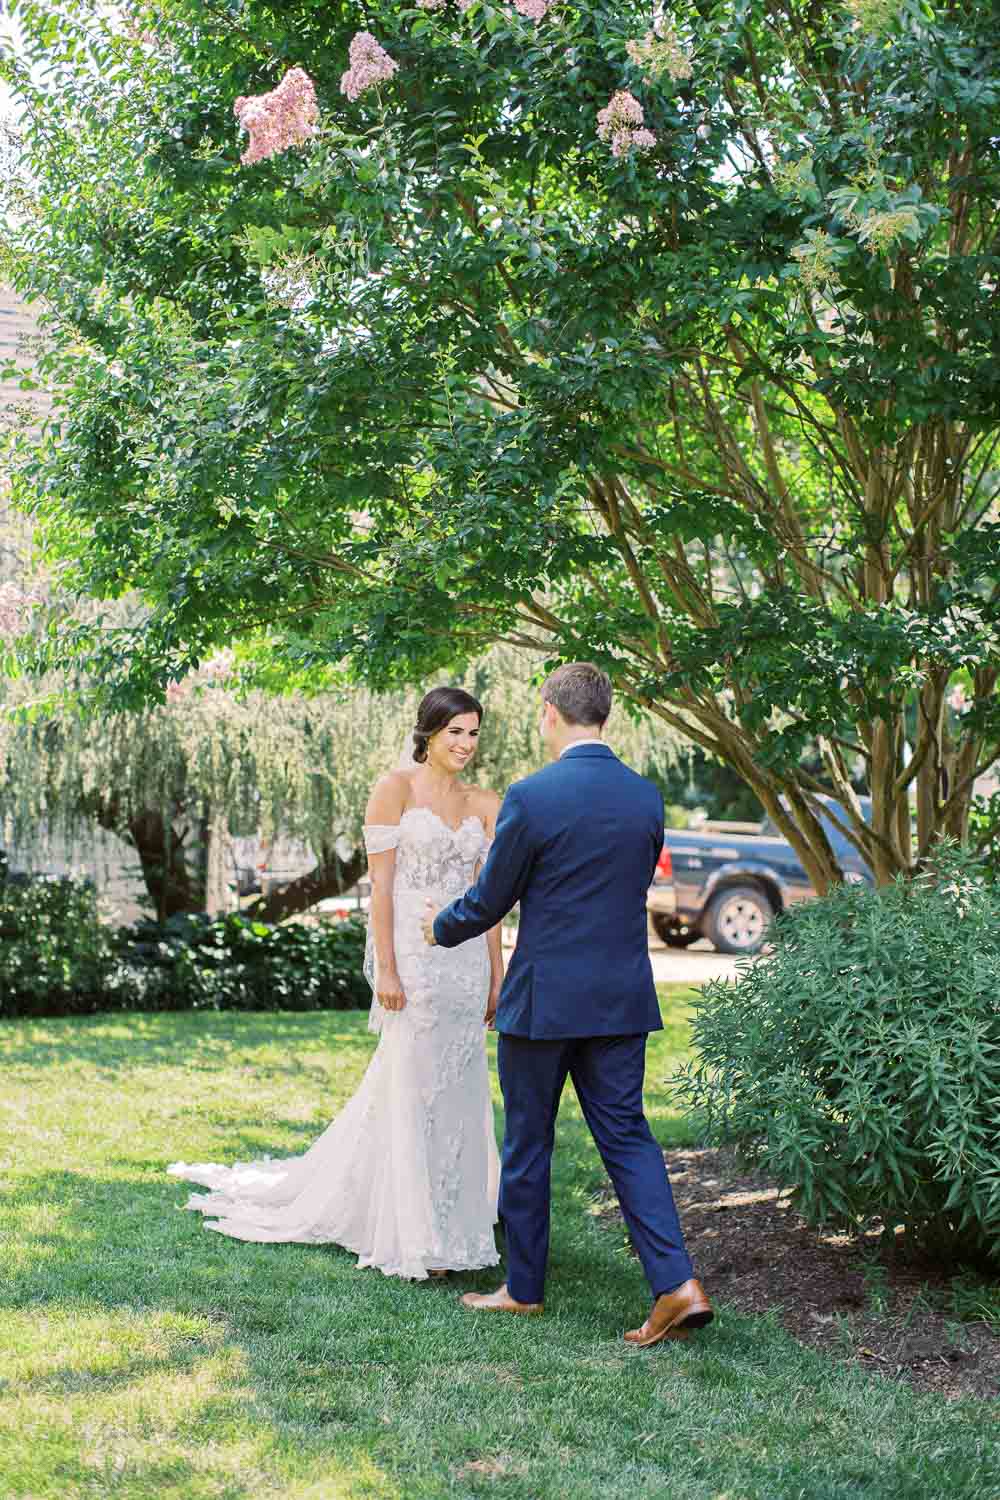 Vibrant summer wedding at Blue Hill Farm in Waterford